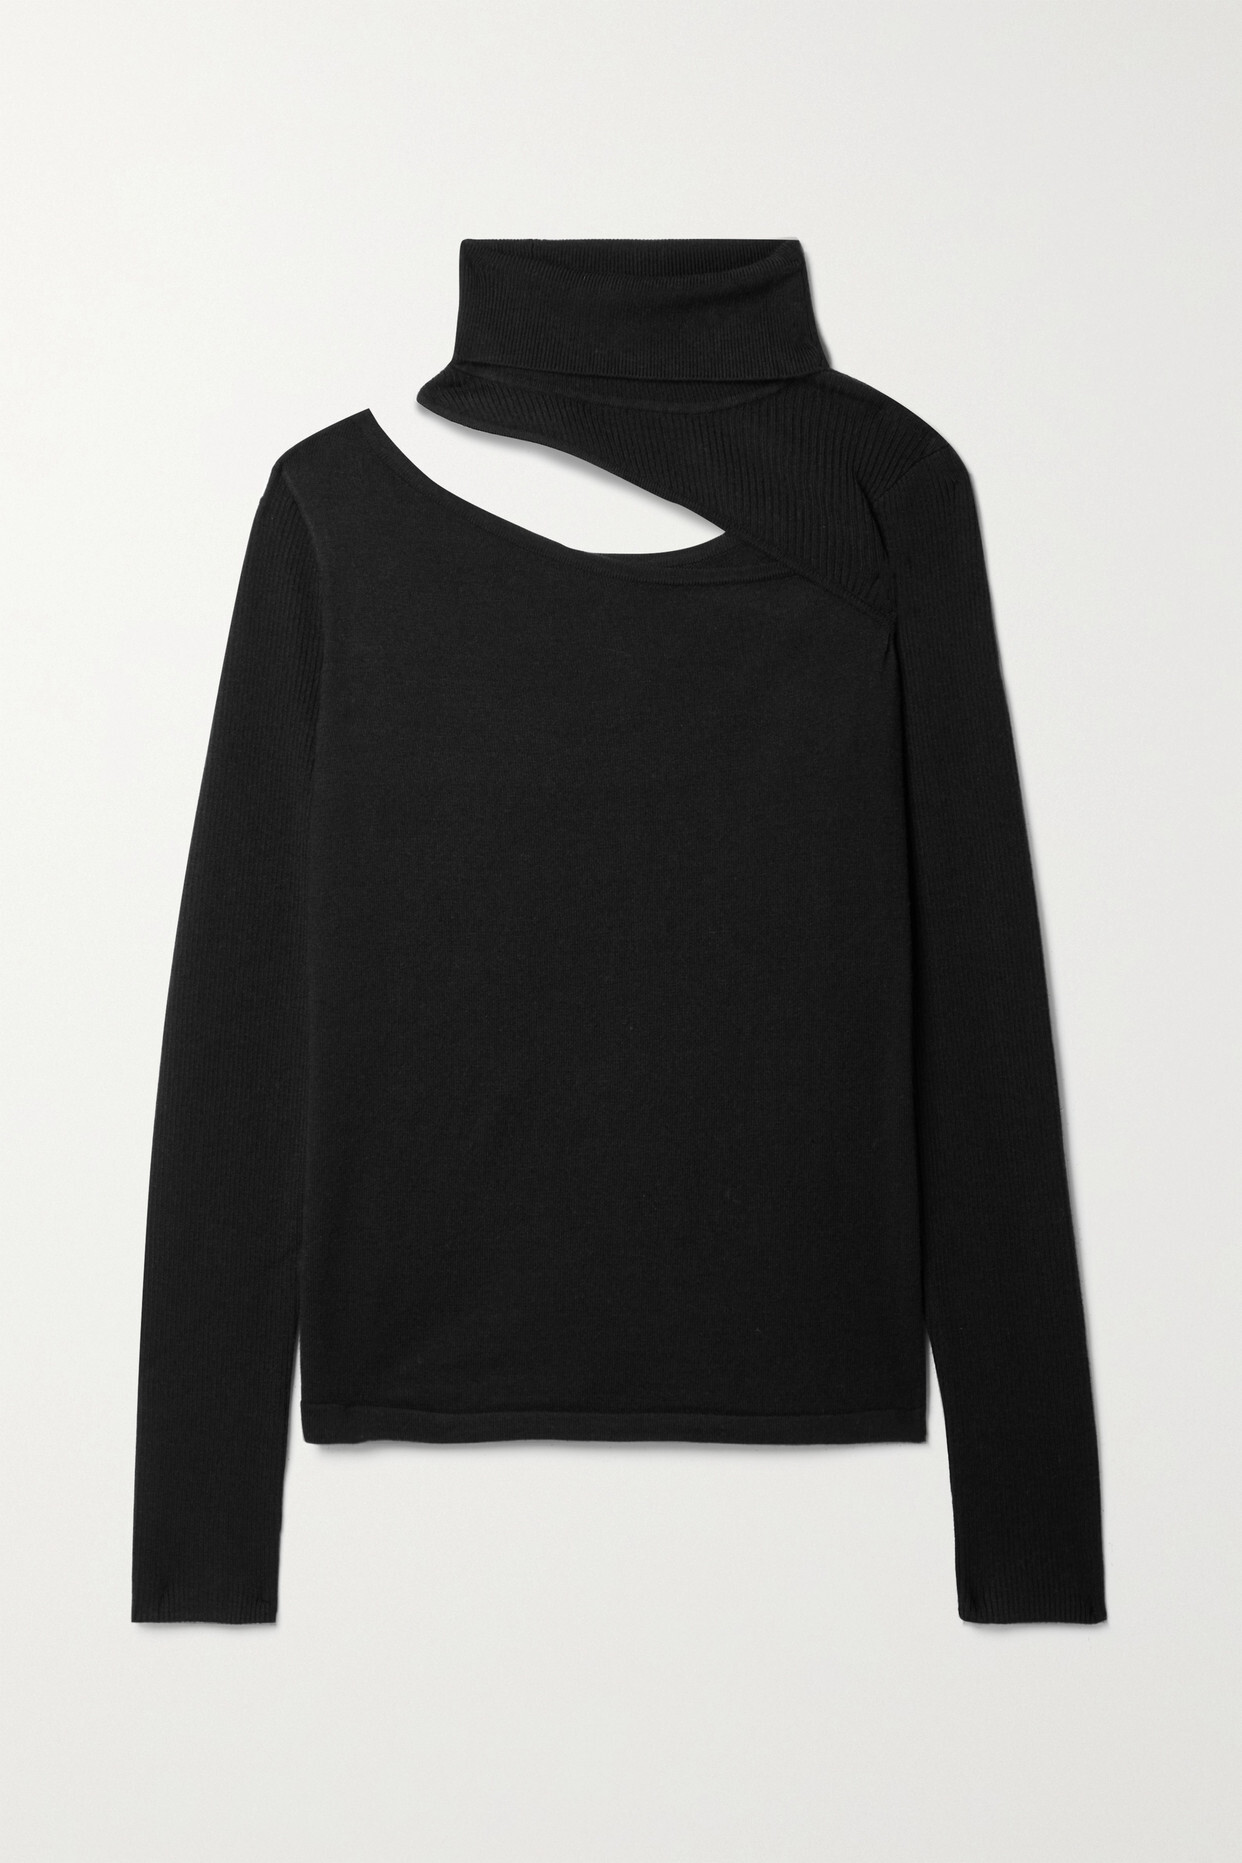 L'Agence - Everlee Cut-out Knitted Turtleneck Sweater - Black